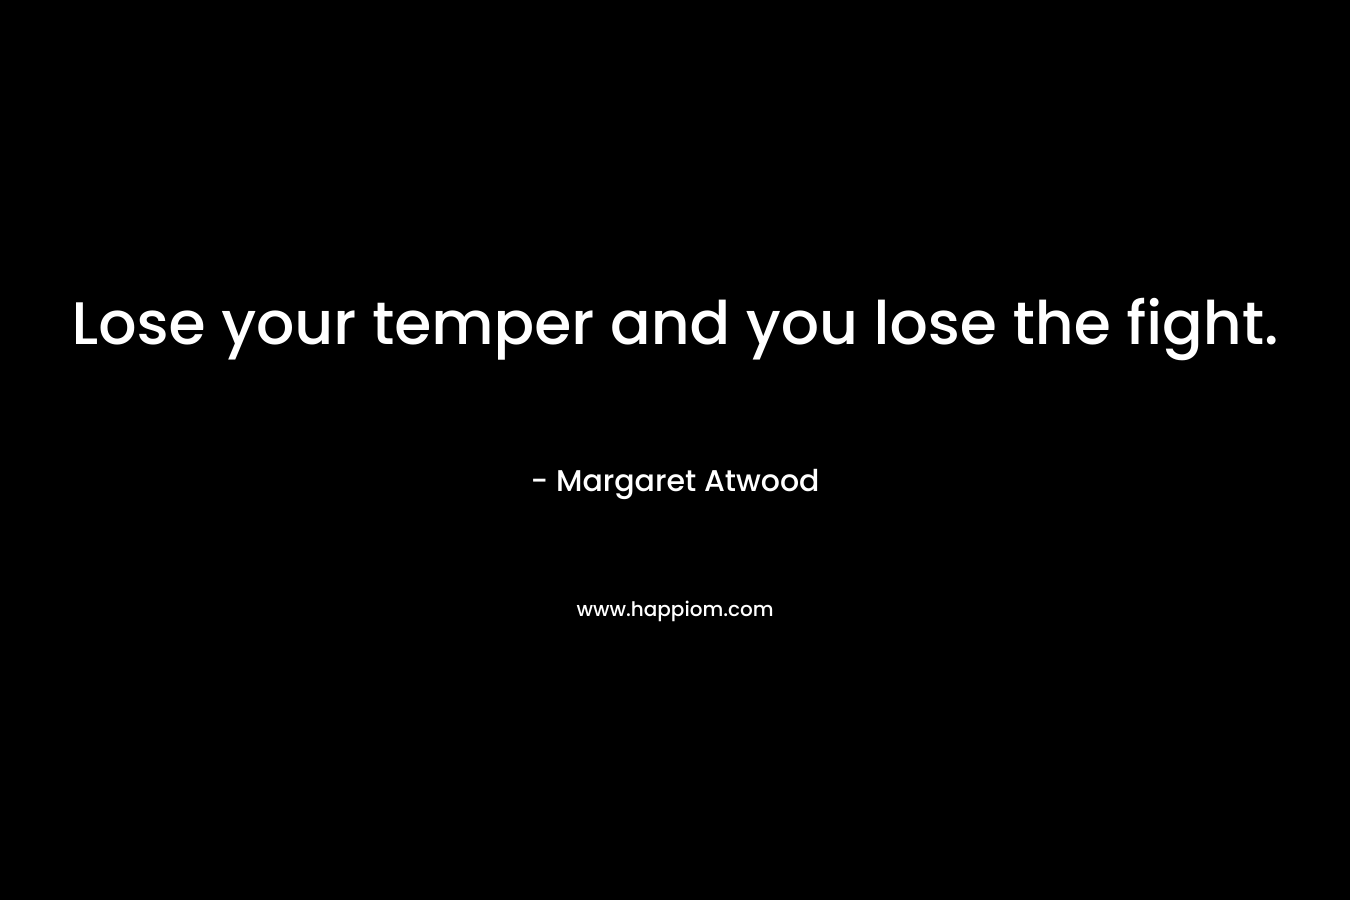 Lose your temper and you lose the fight. – Margaret Atwood